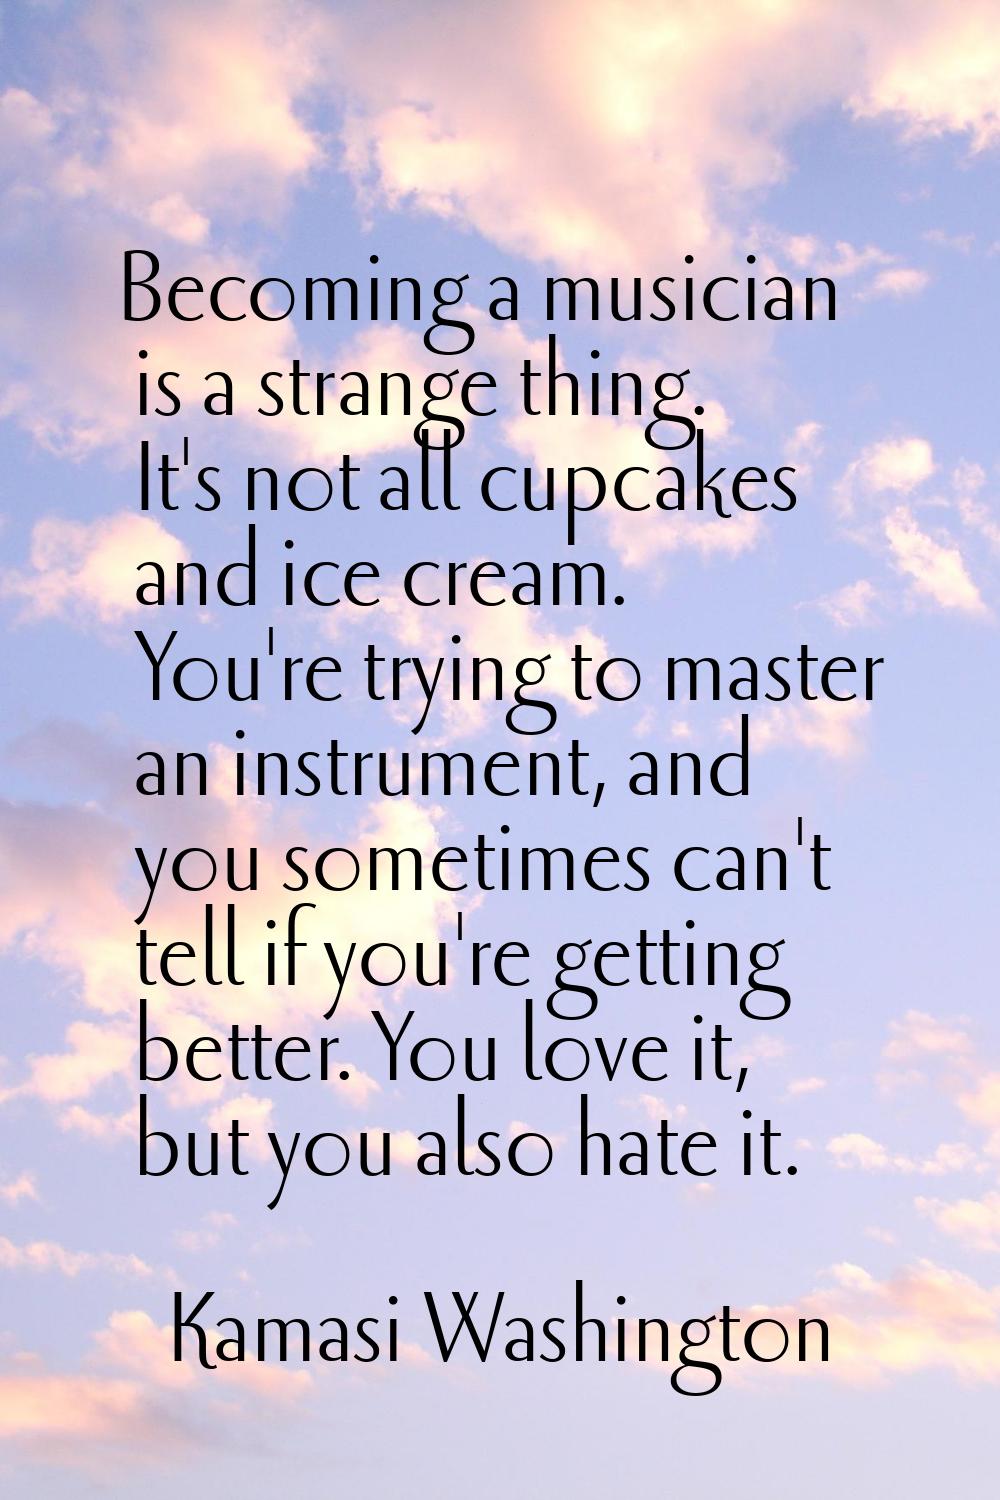 Becoming a musician is a strange thing. It's not all cupcakes and ice cream. You're trying to maste